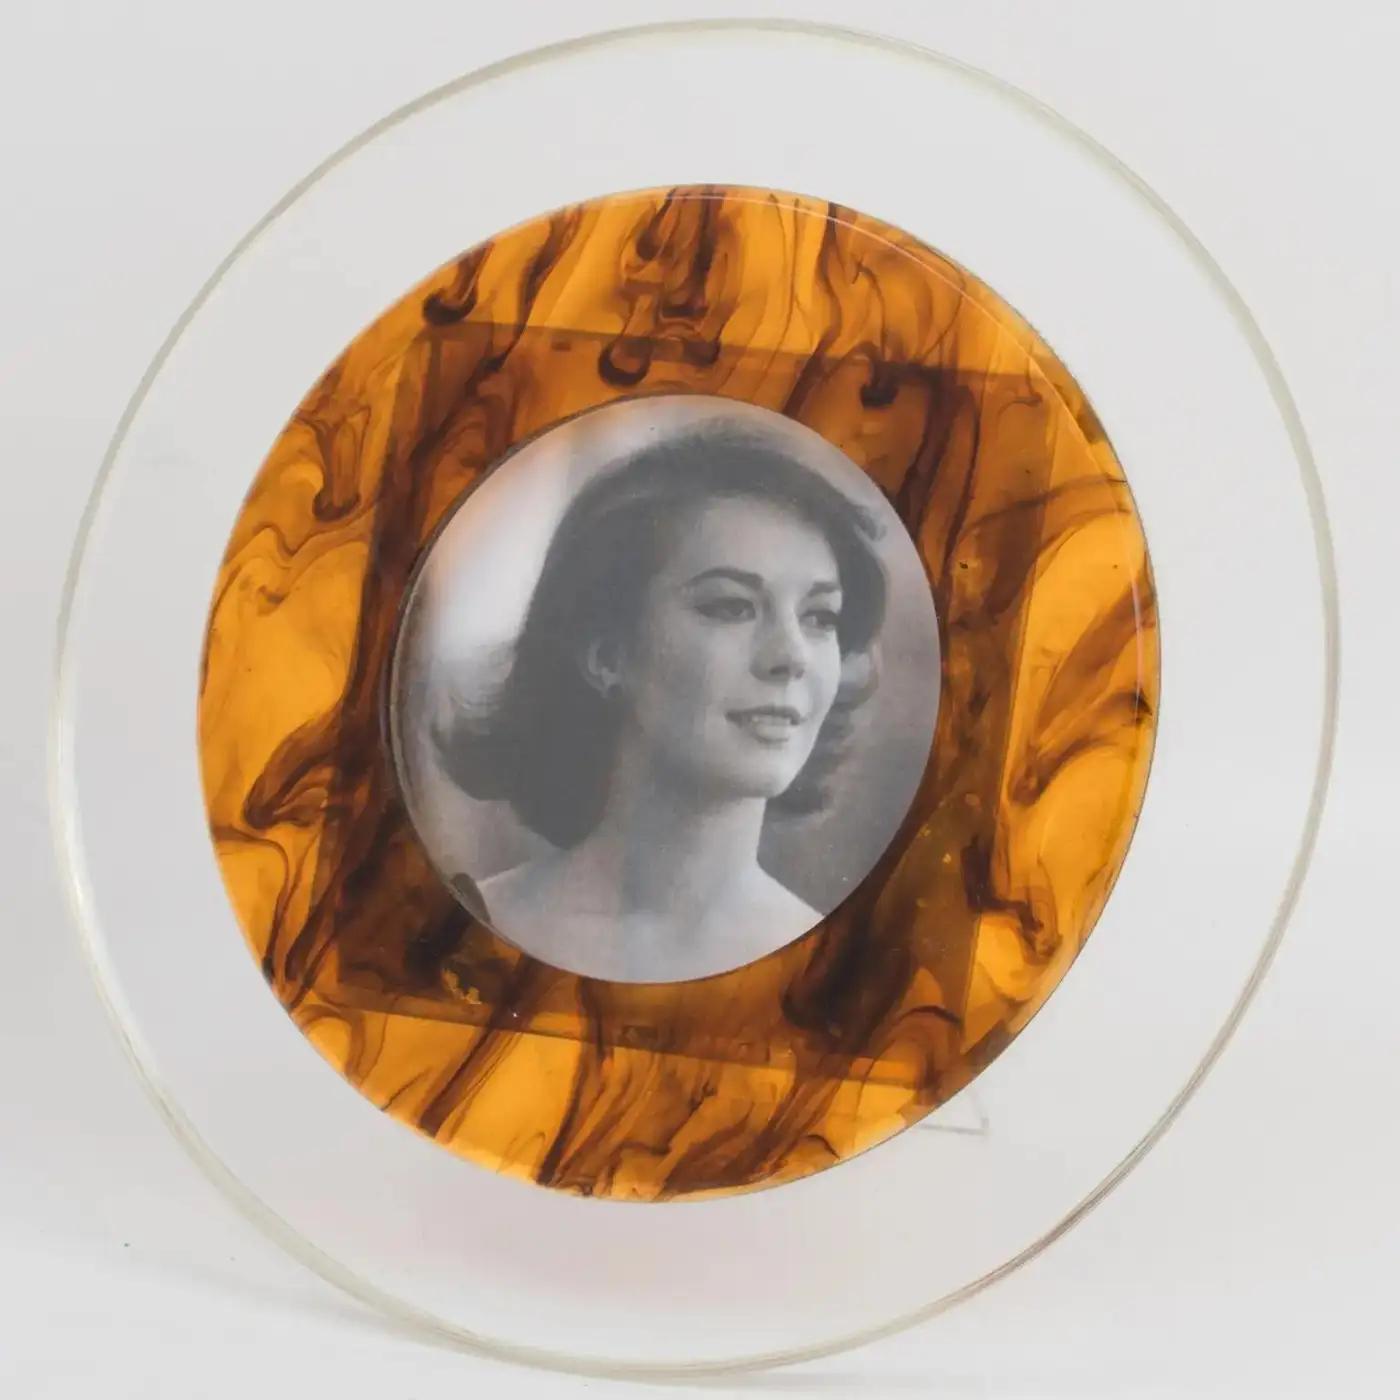 Christian Dior designed this stunning picture frame for his Christian Dior Home Collection in the 1970s. It is the perfect way to showcase your favorite photos. The frame has a rounded shape and a lovely combination of clear and tortoiseshell